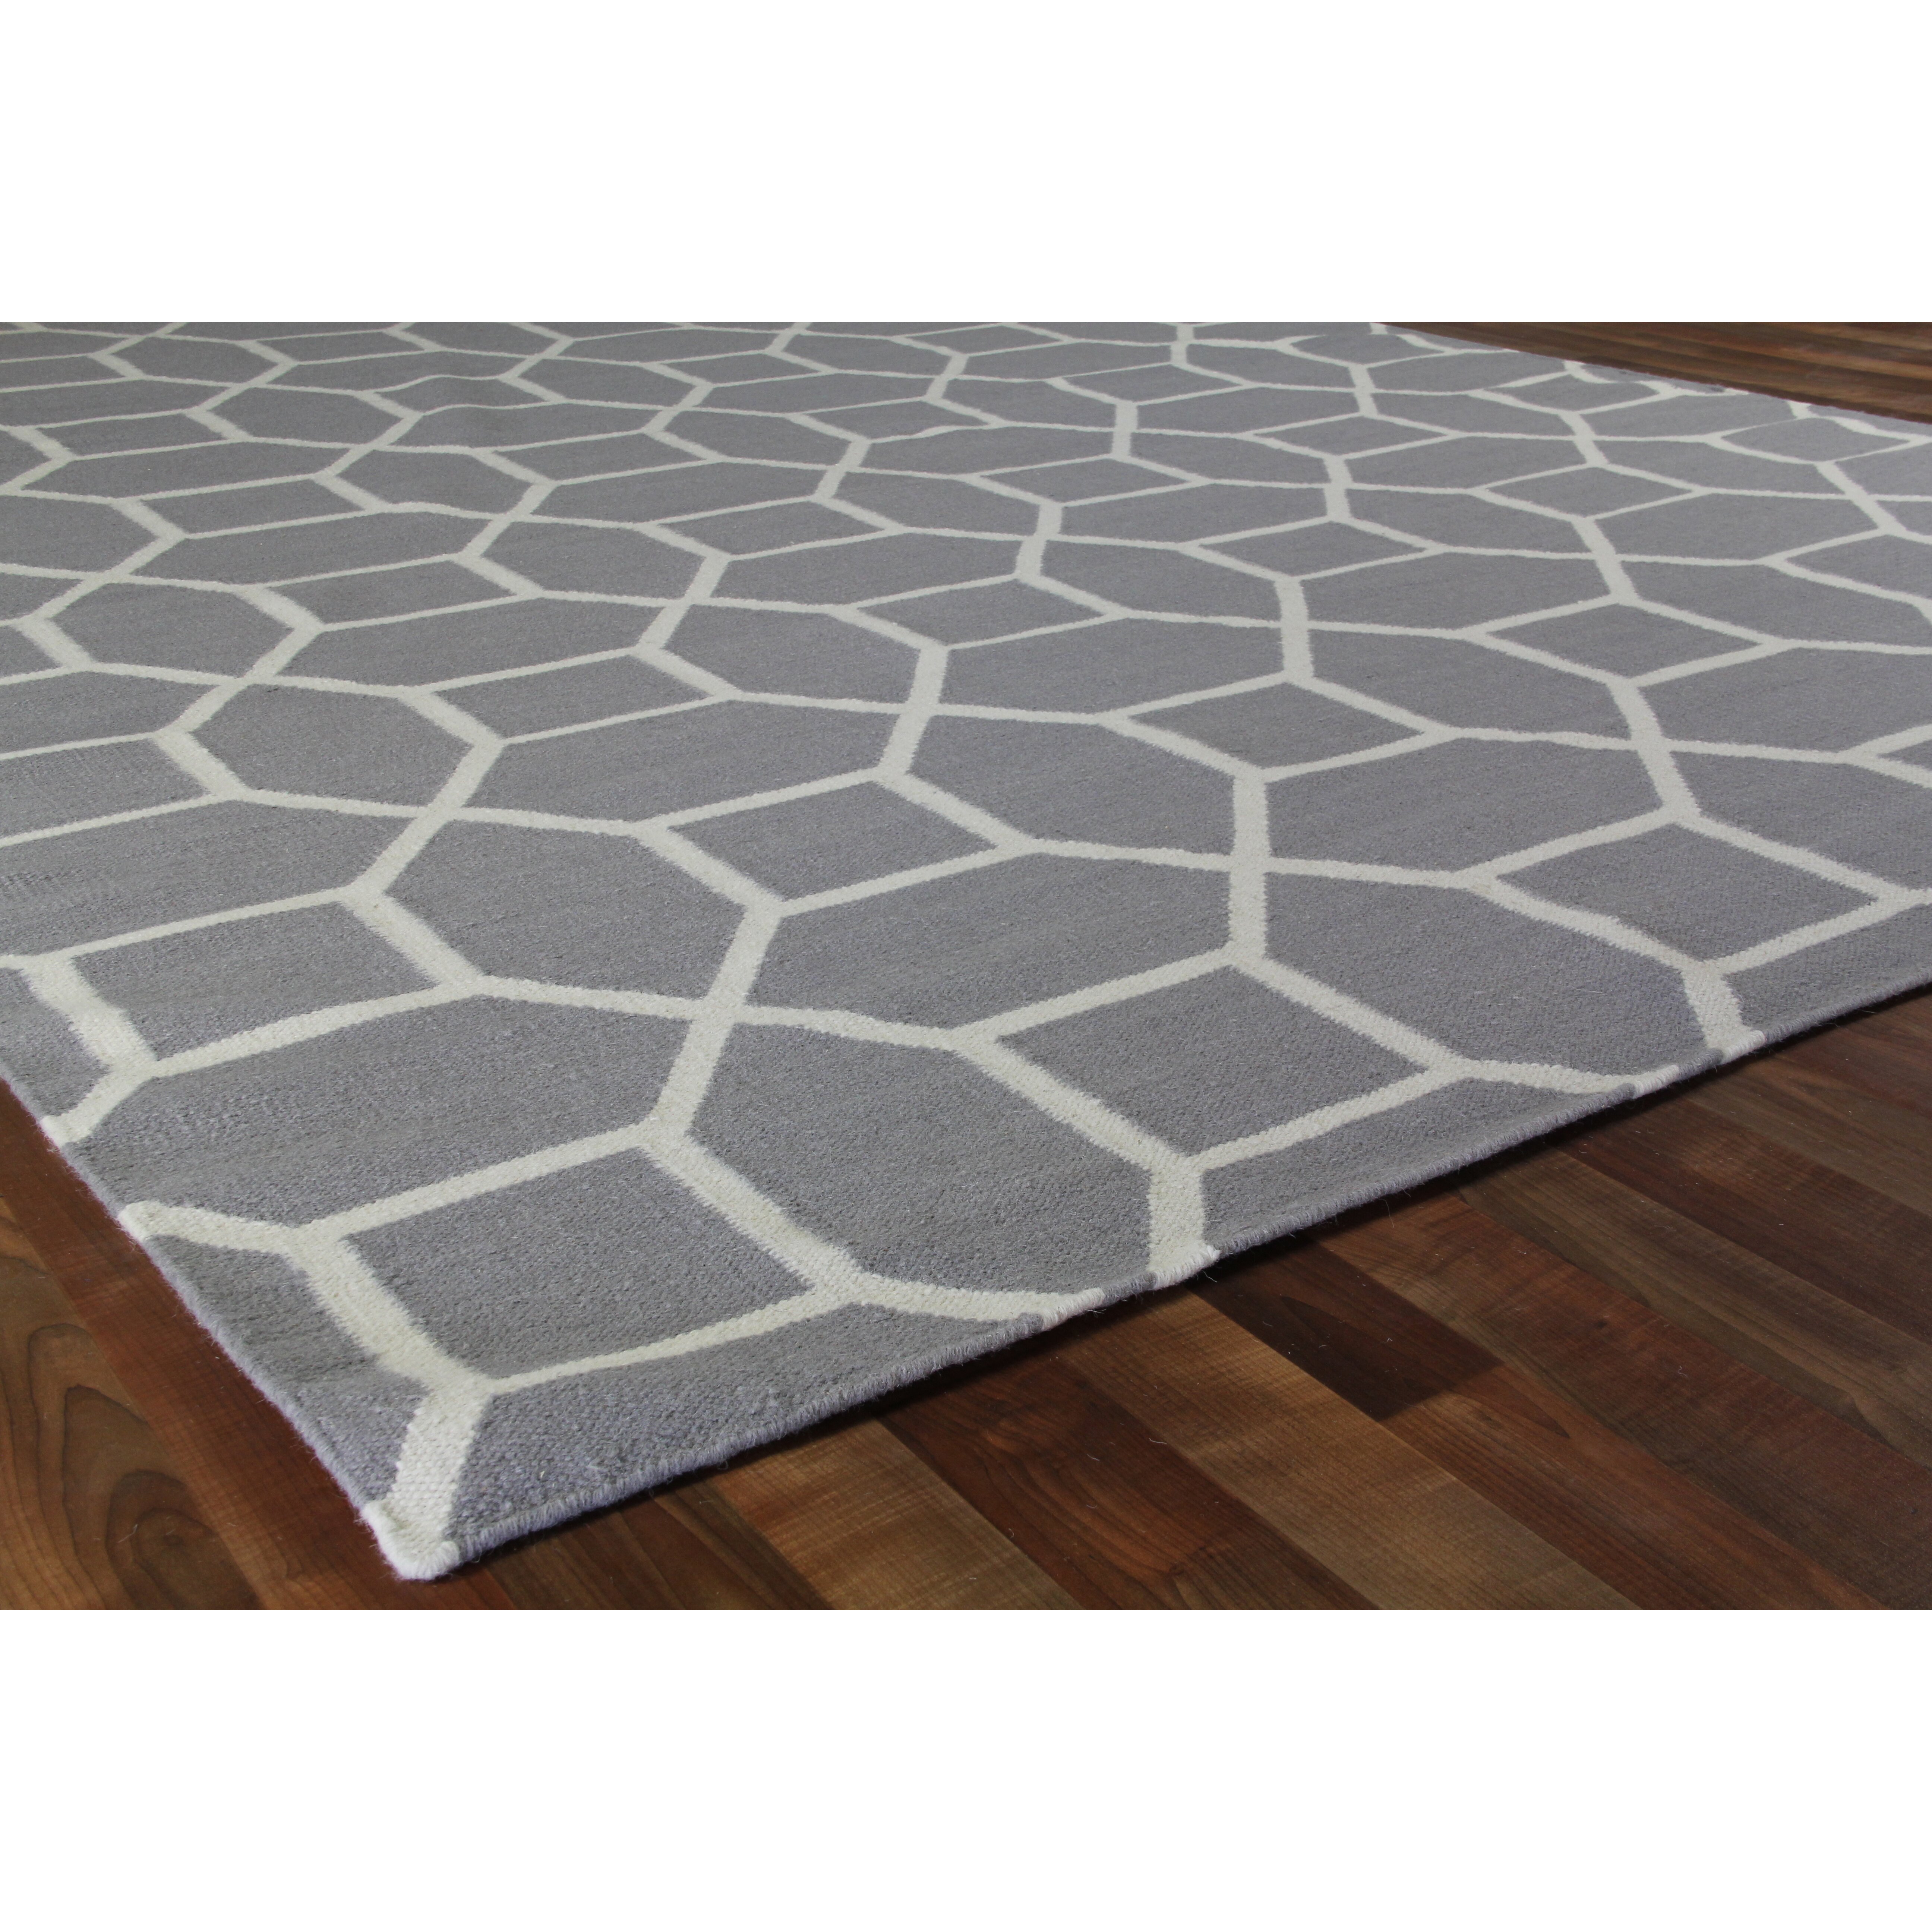 Rug Expressions Flat Weave Gray Cream Area Rug WF9707 